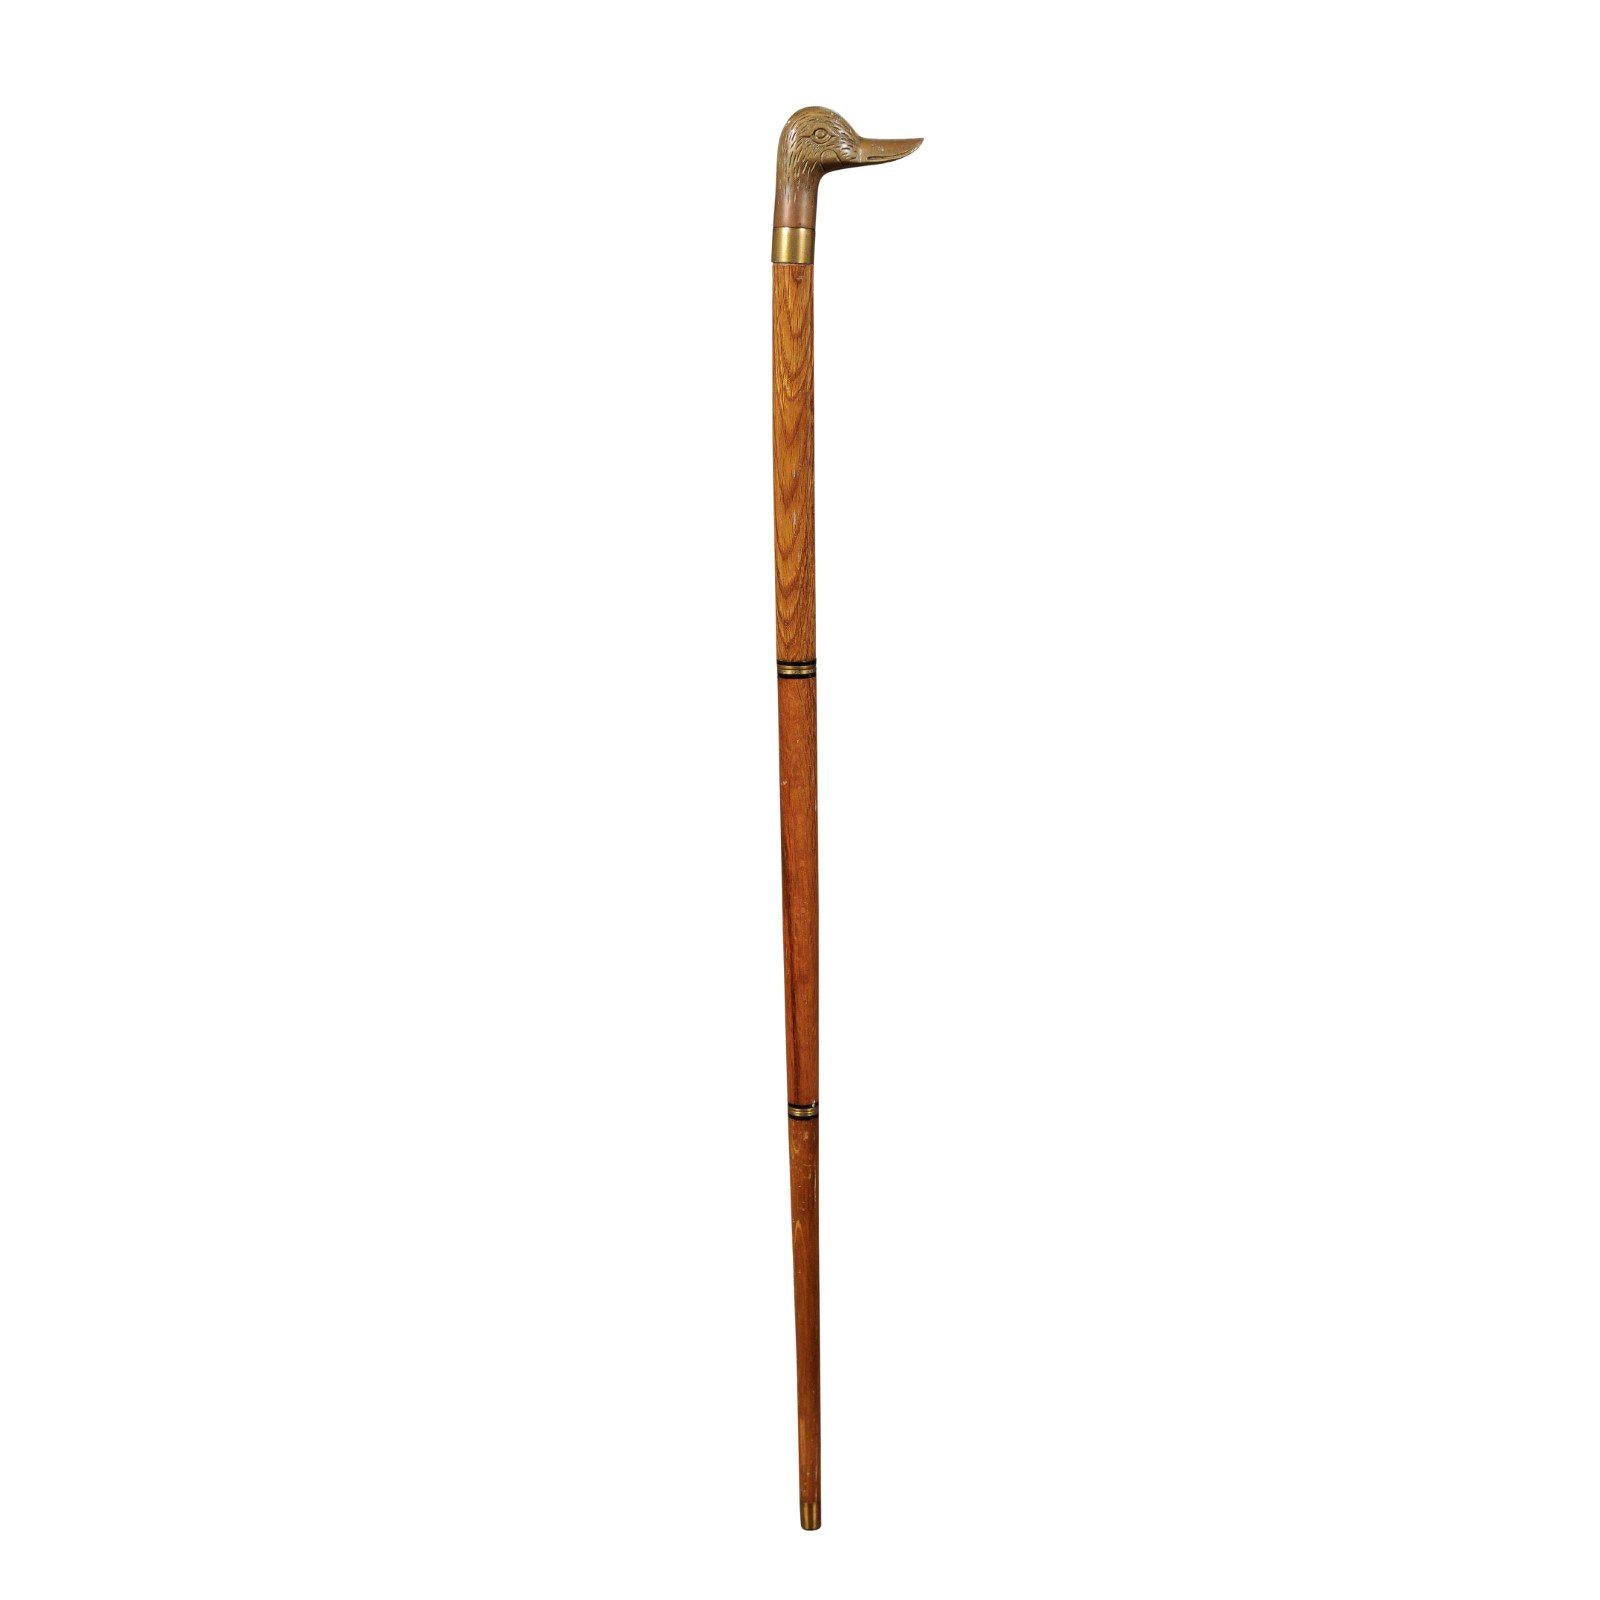 English Wooden Walking Cane with Brass Duck Head Handle and Ebonized Accents